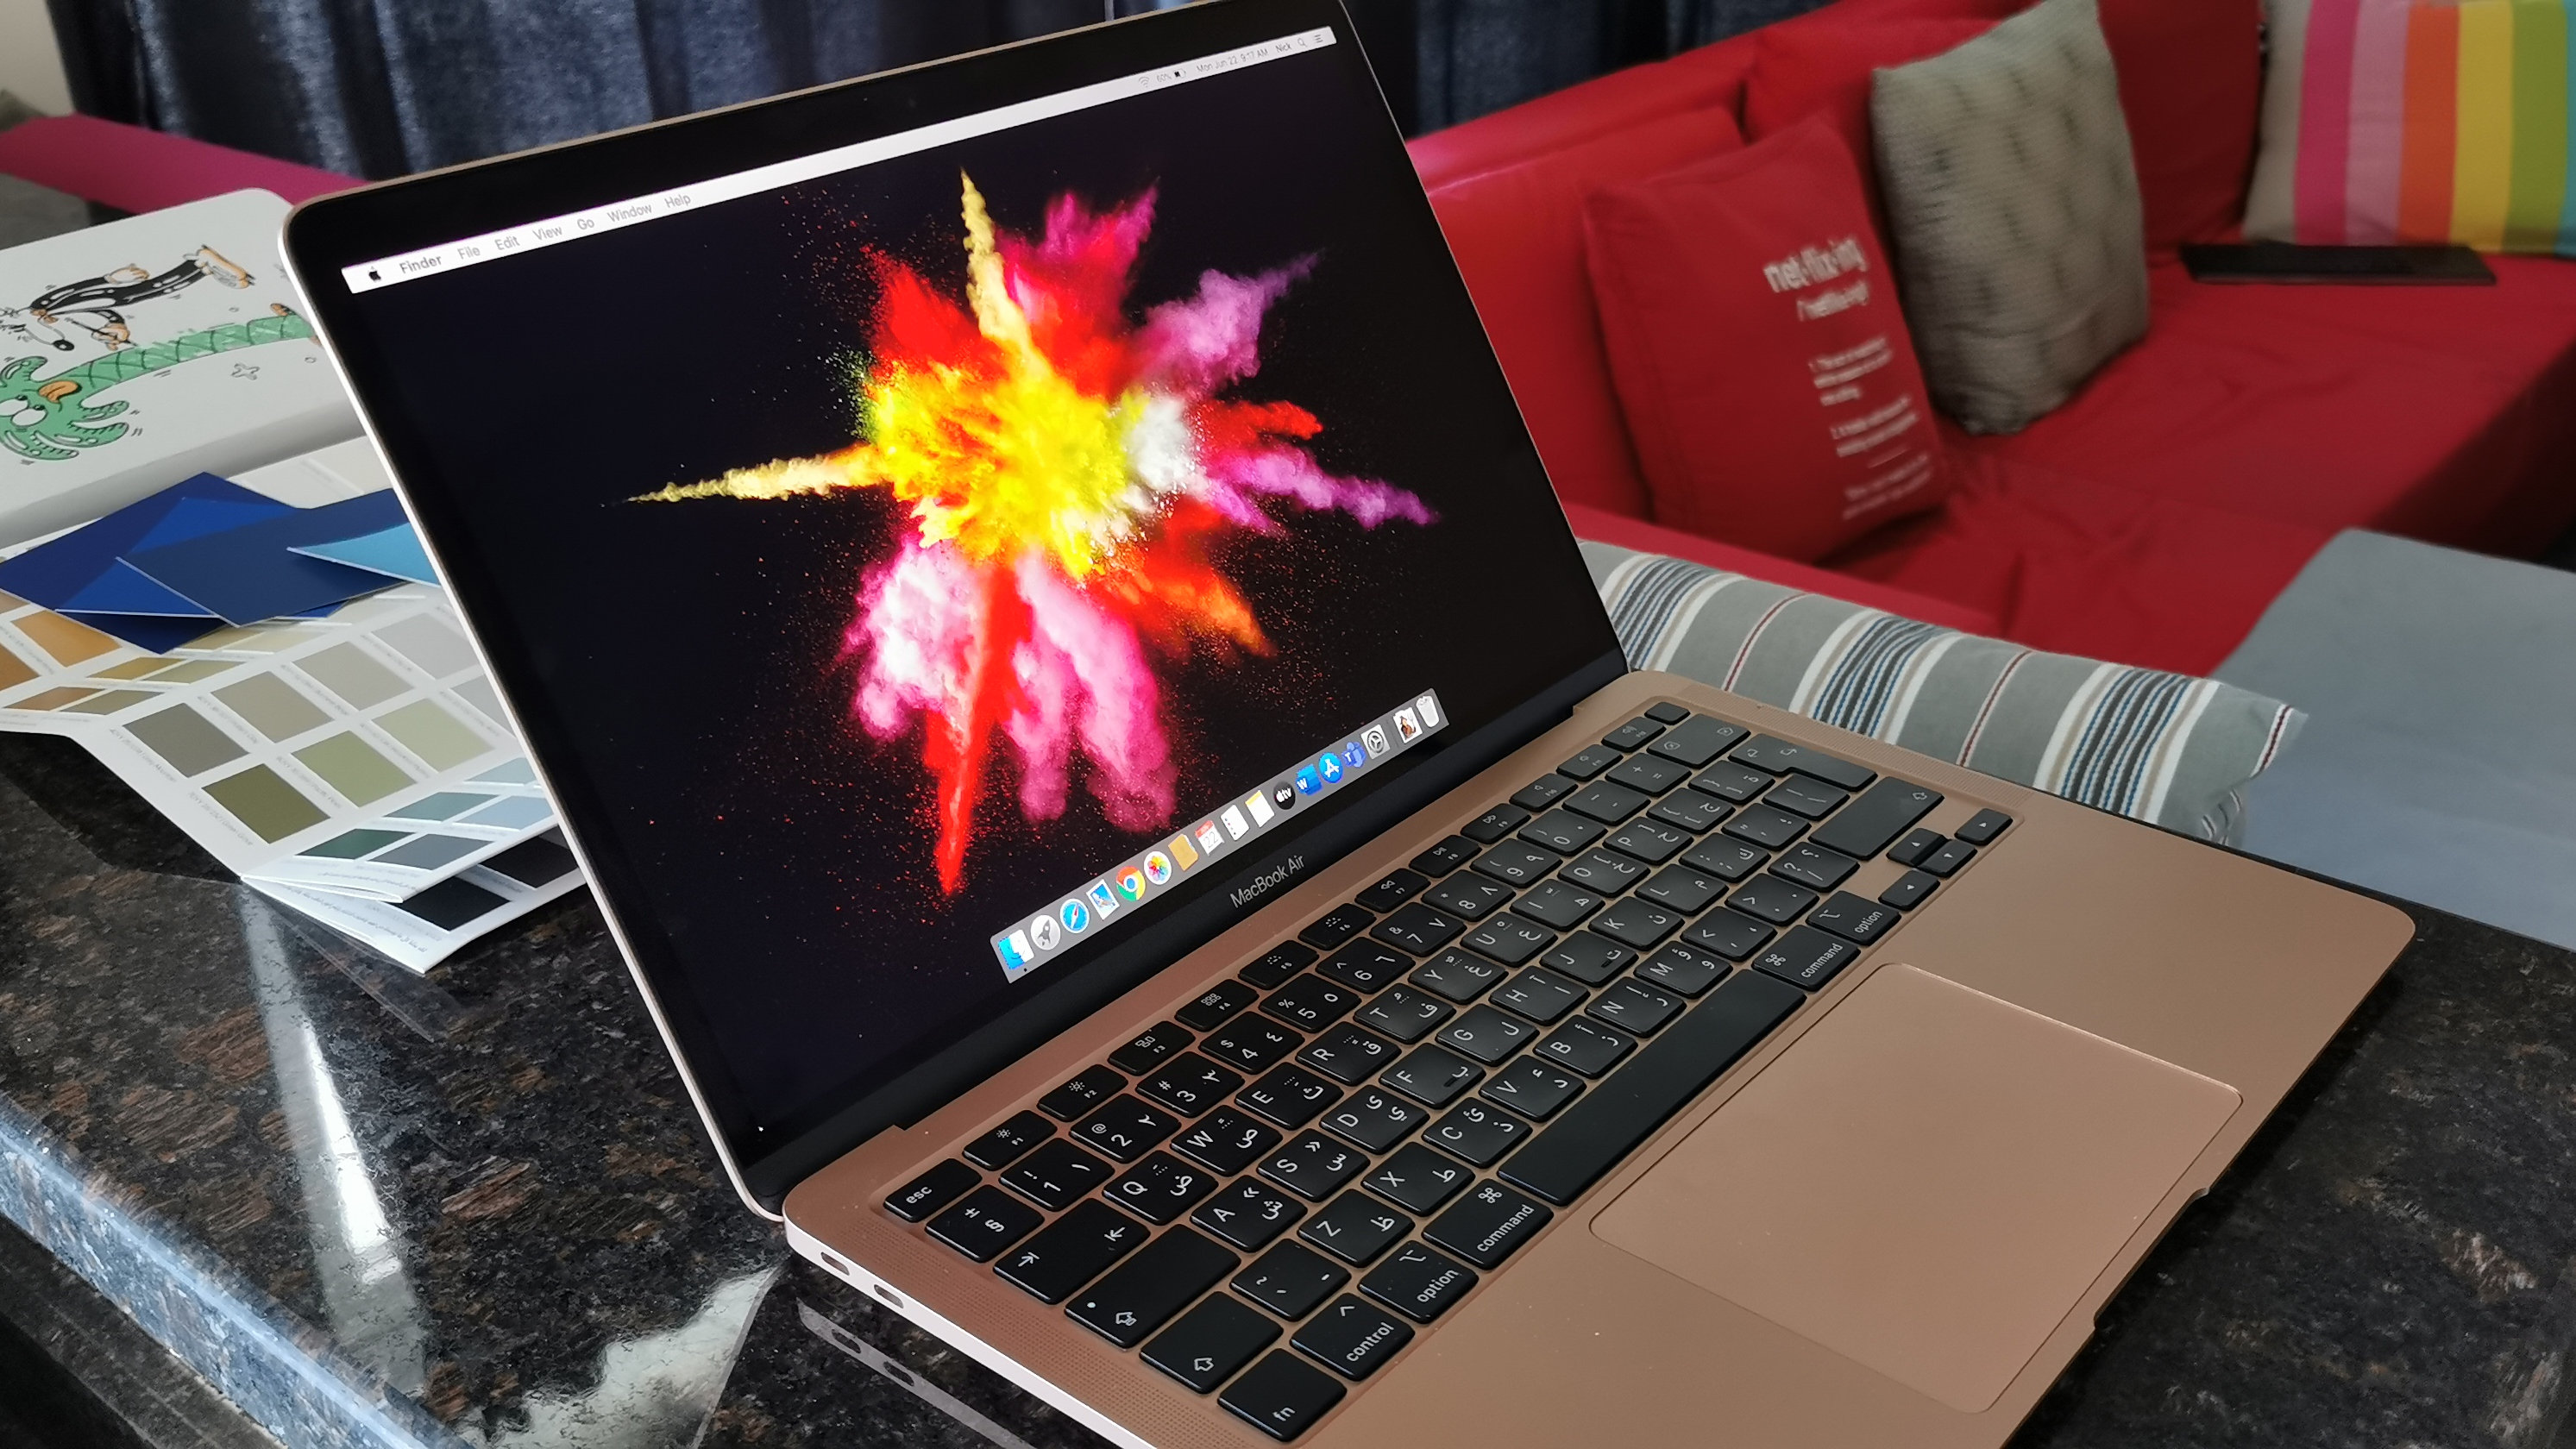 recommended antivirus for mac 2018